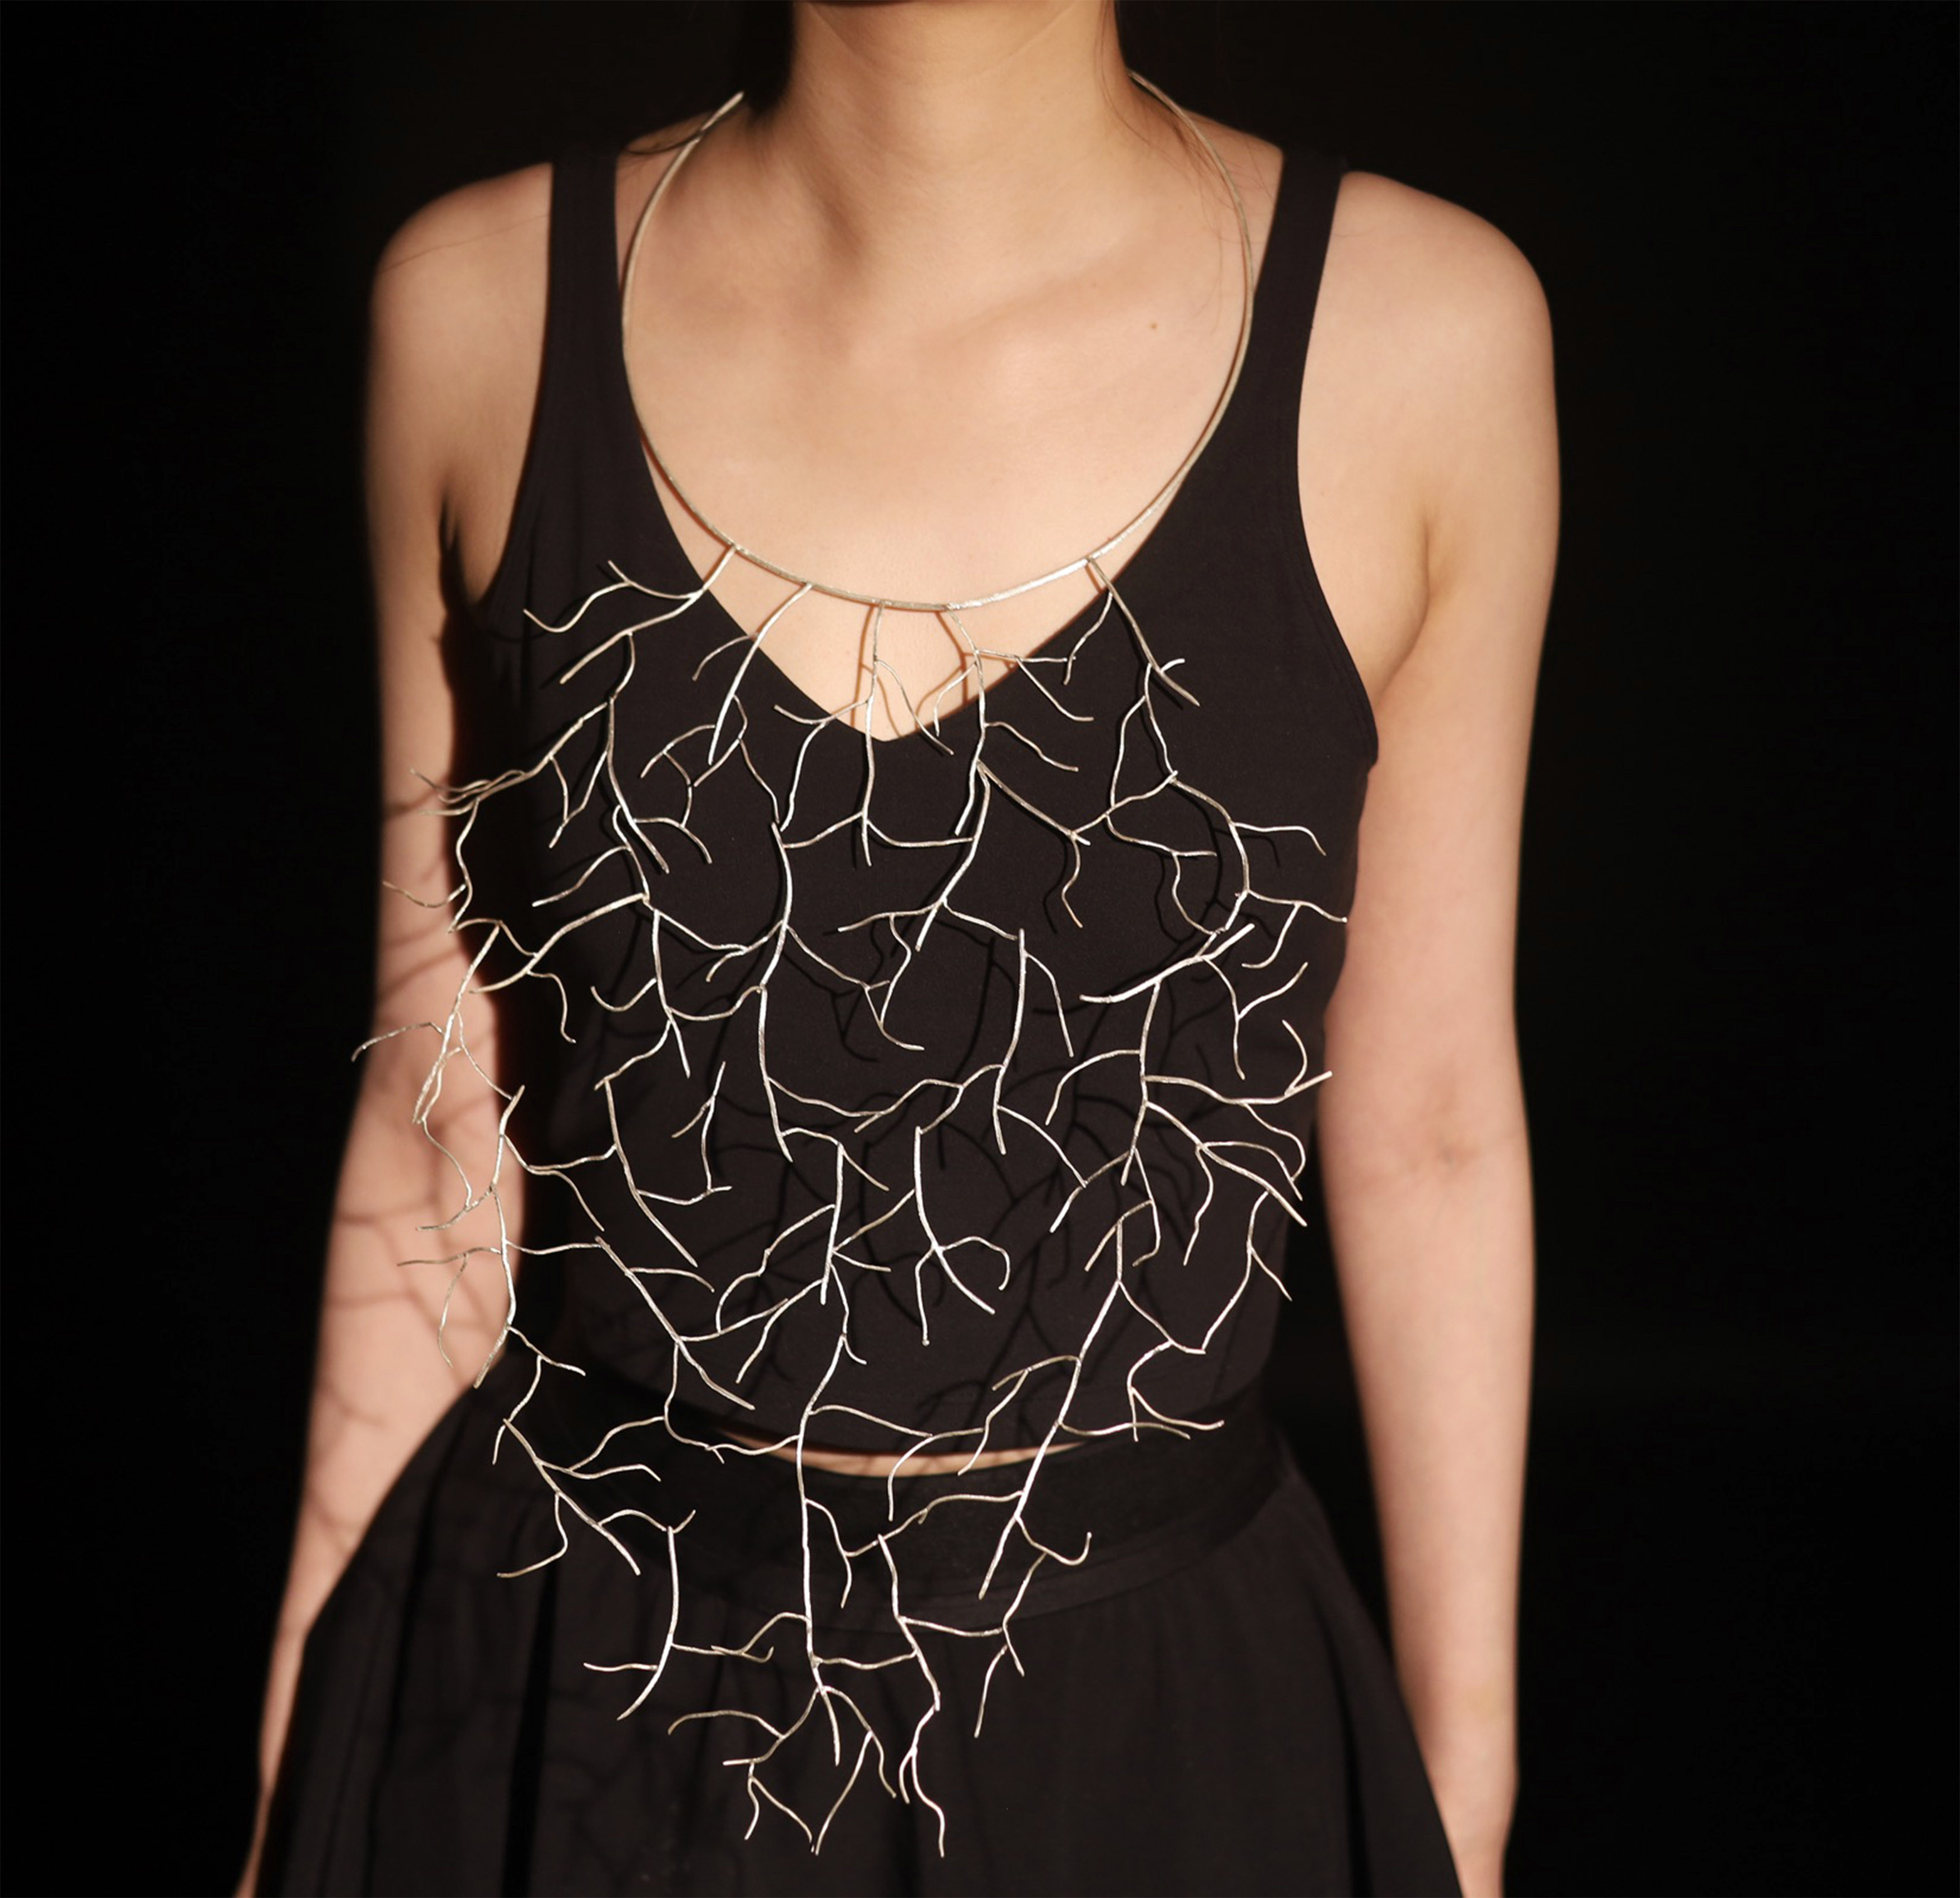 Synaptic Blossom necklaces